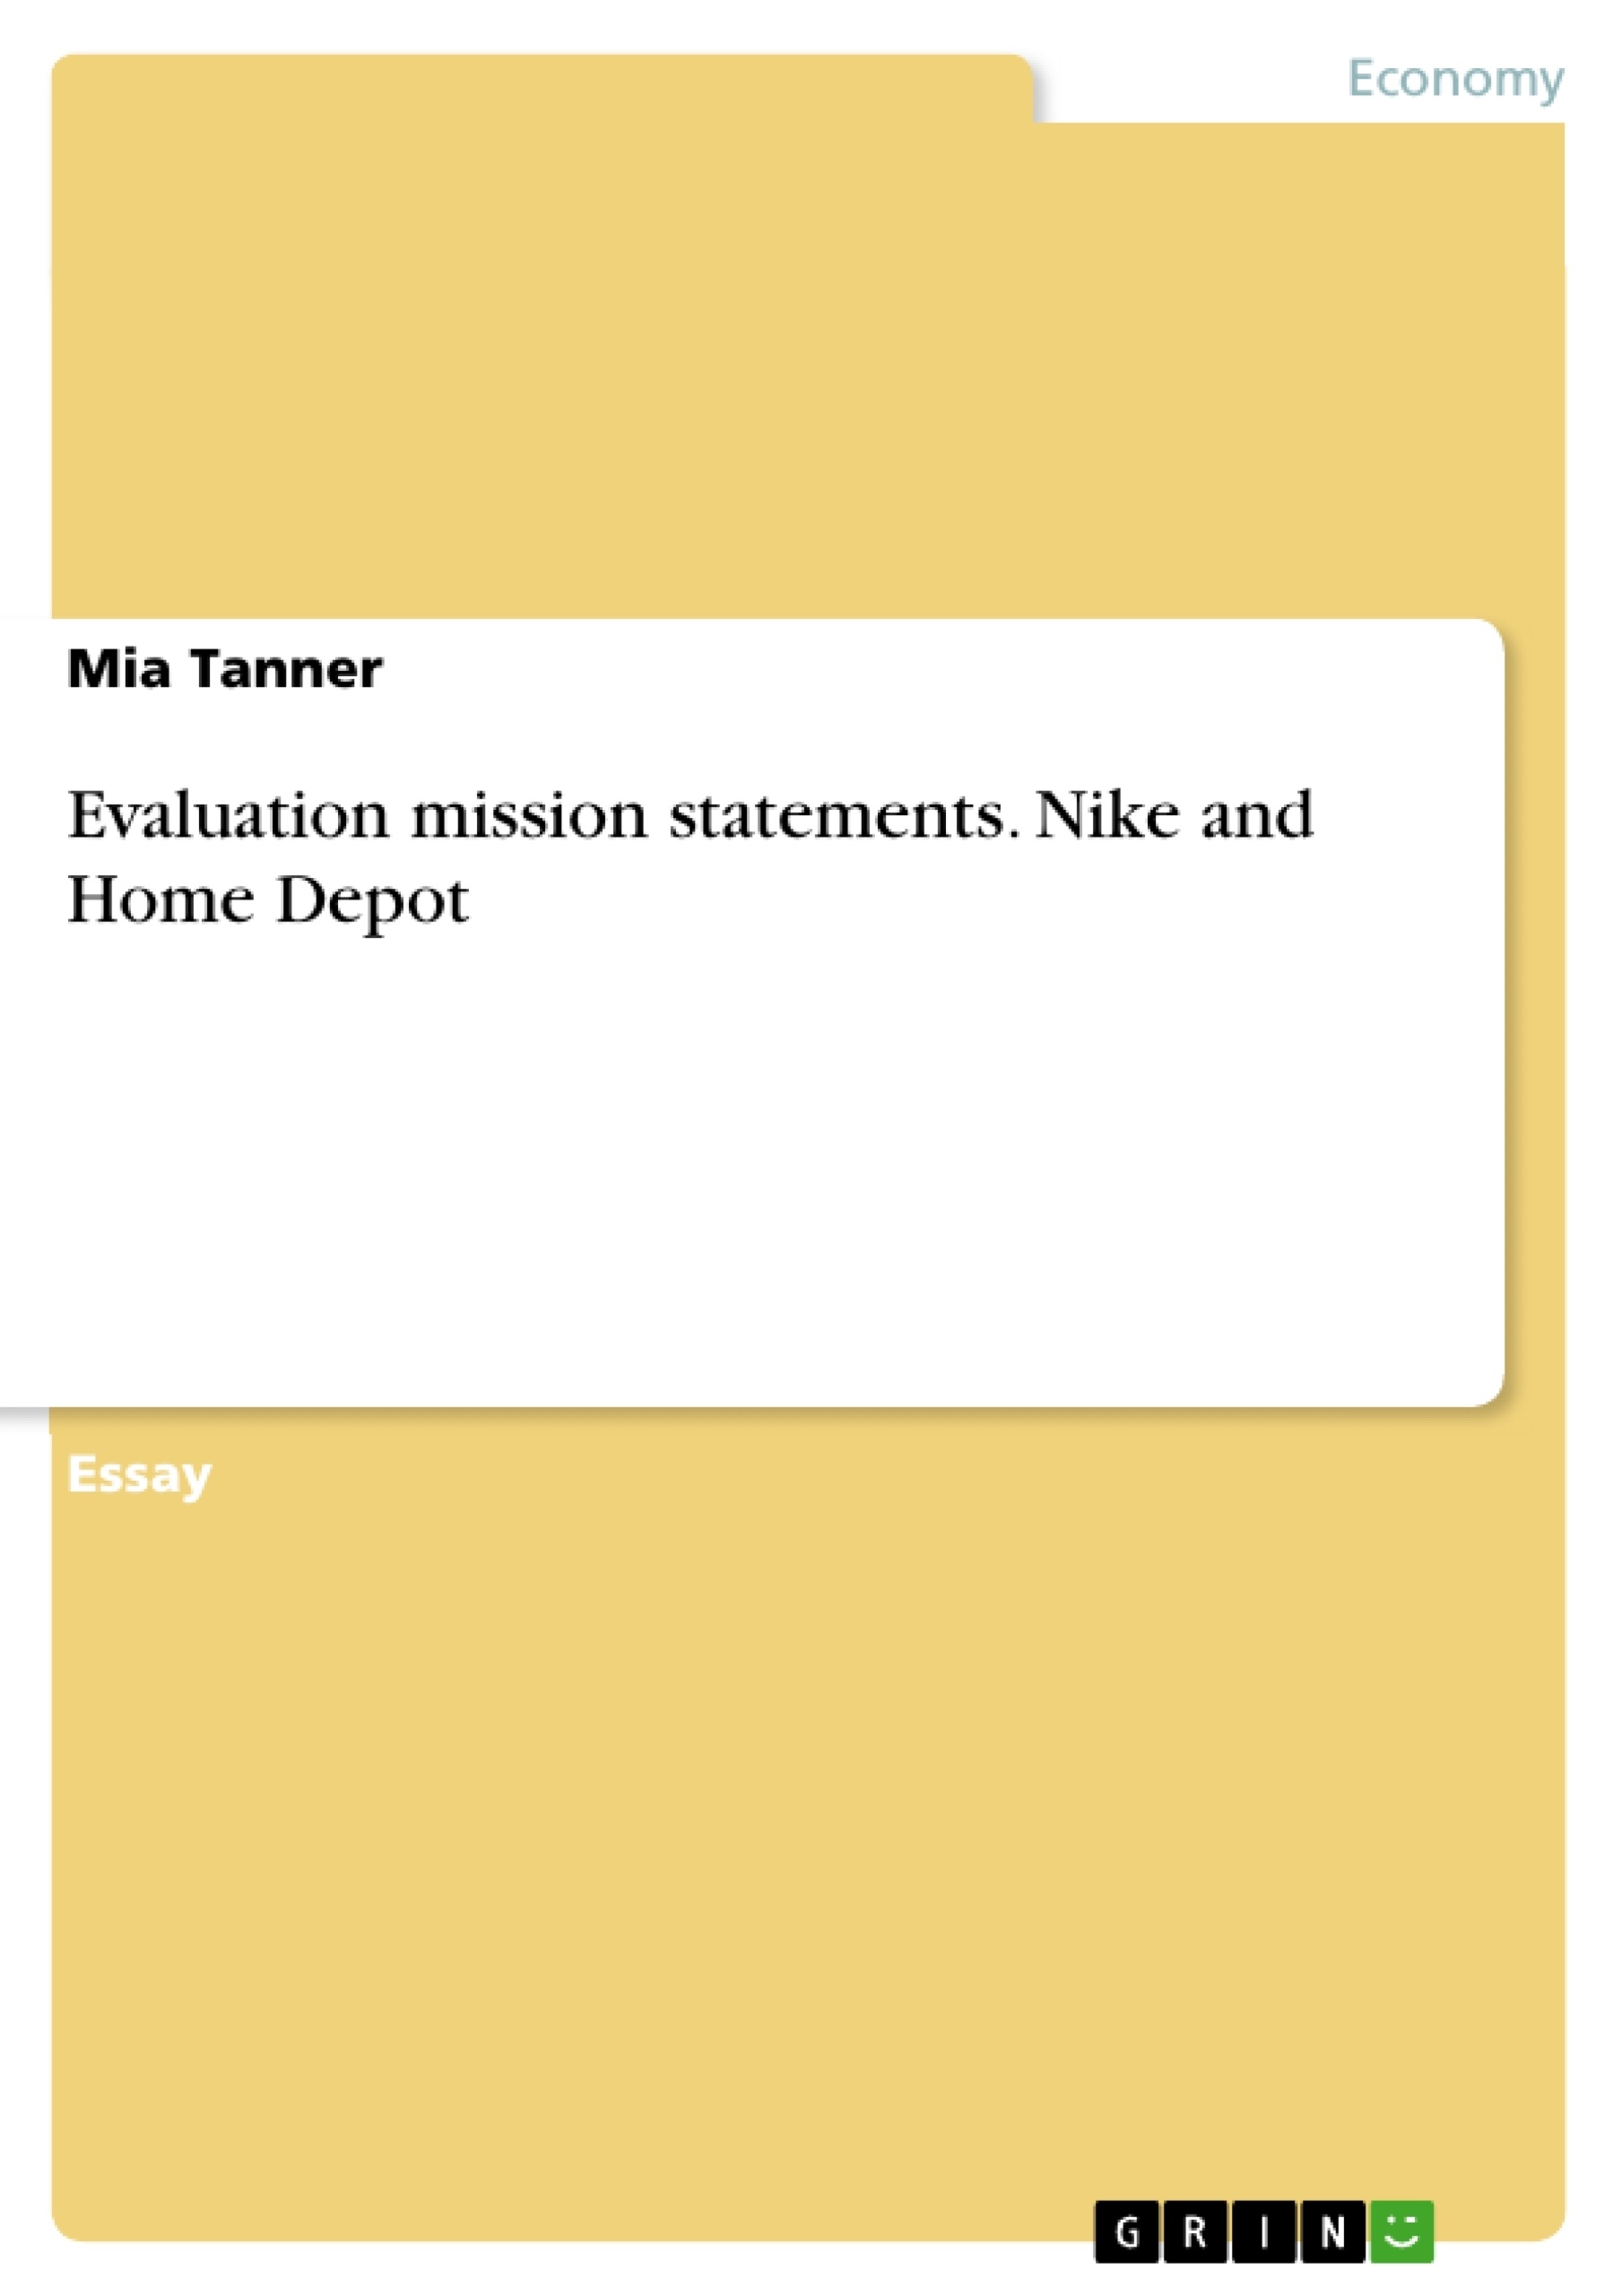 Title: Evaluation mission statements. Nike and Home Depot